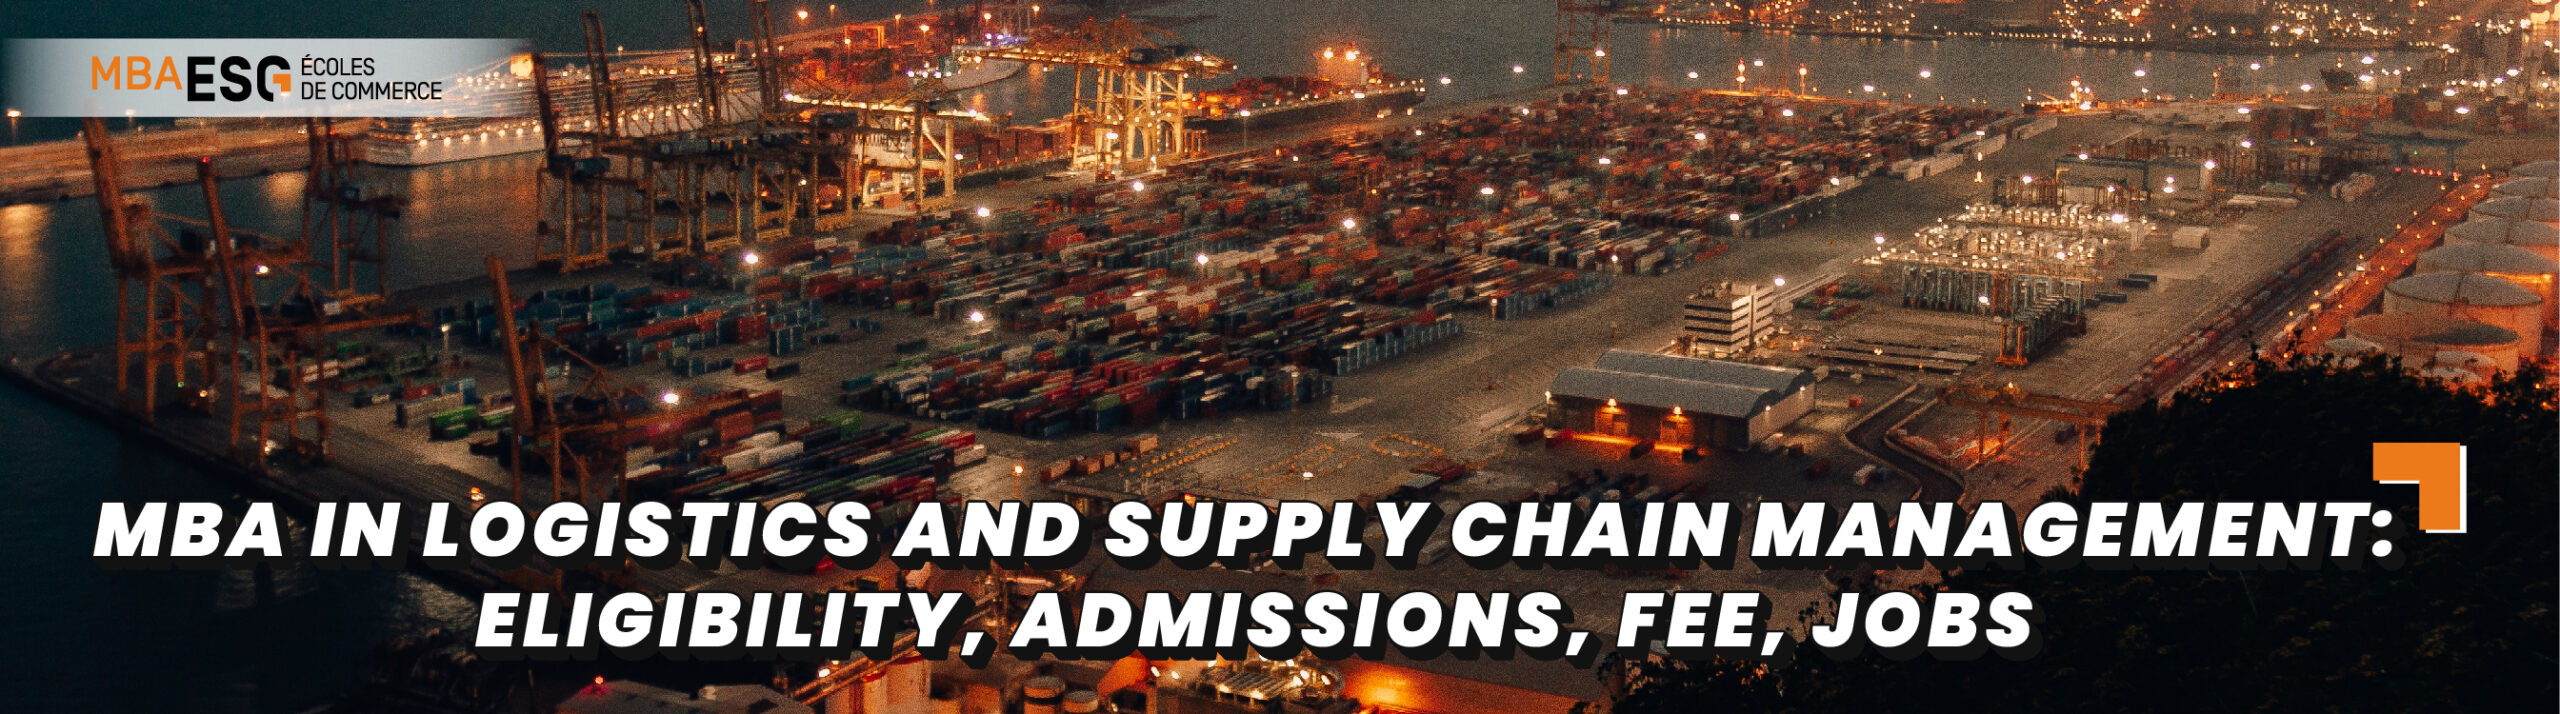 MBA in Logistics and Supply Chain Management: Eligibility, Admissions, Fee, Jobs